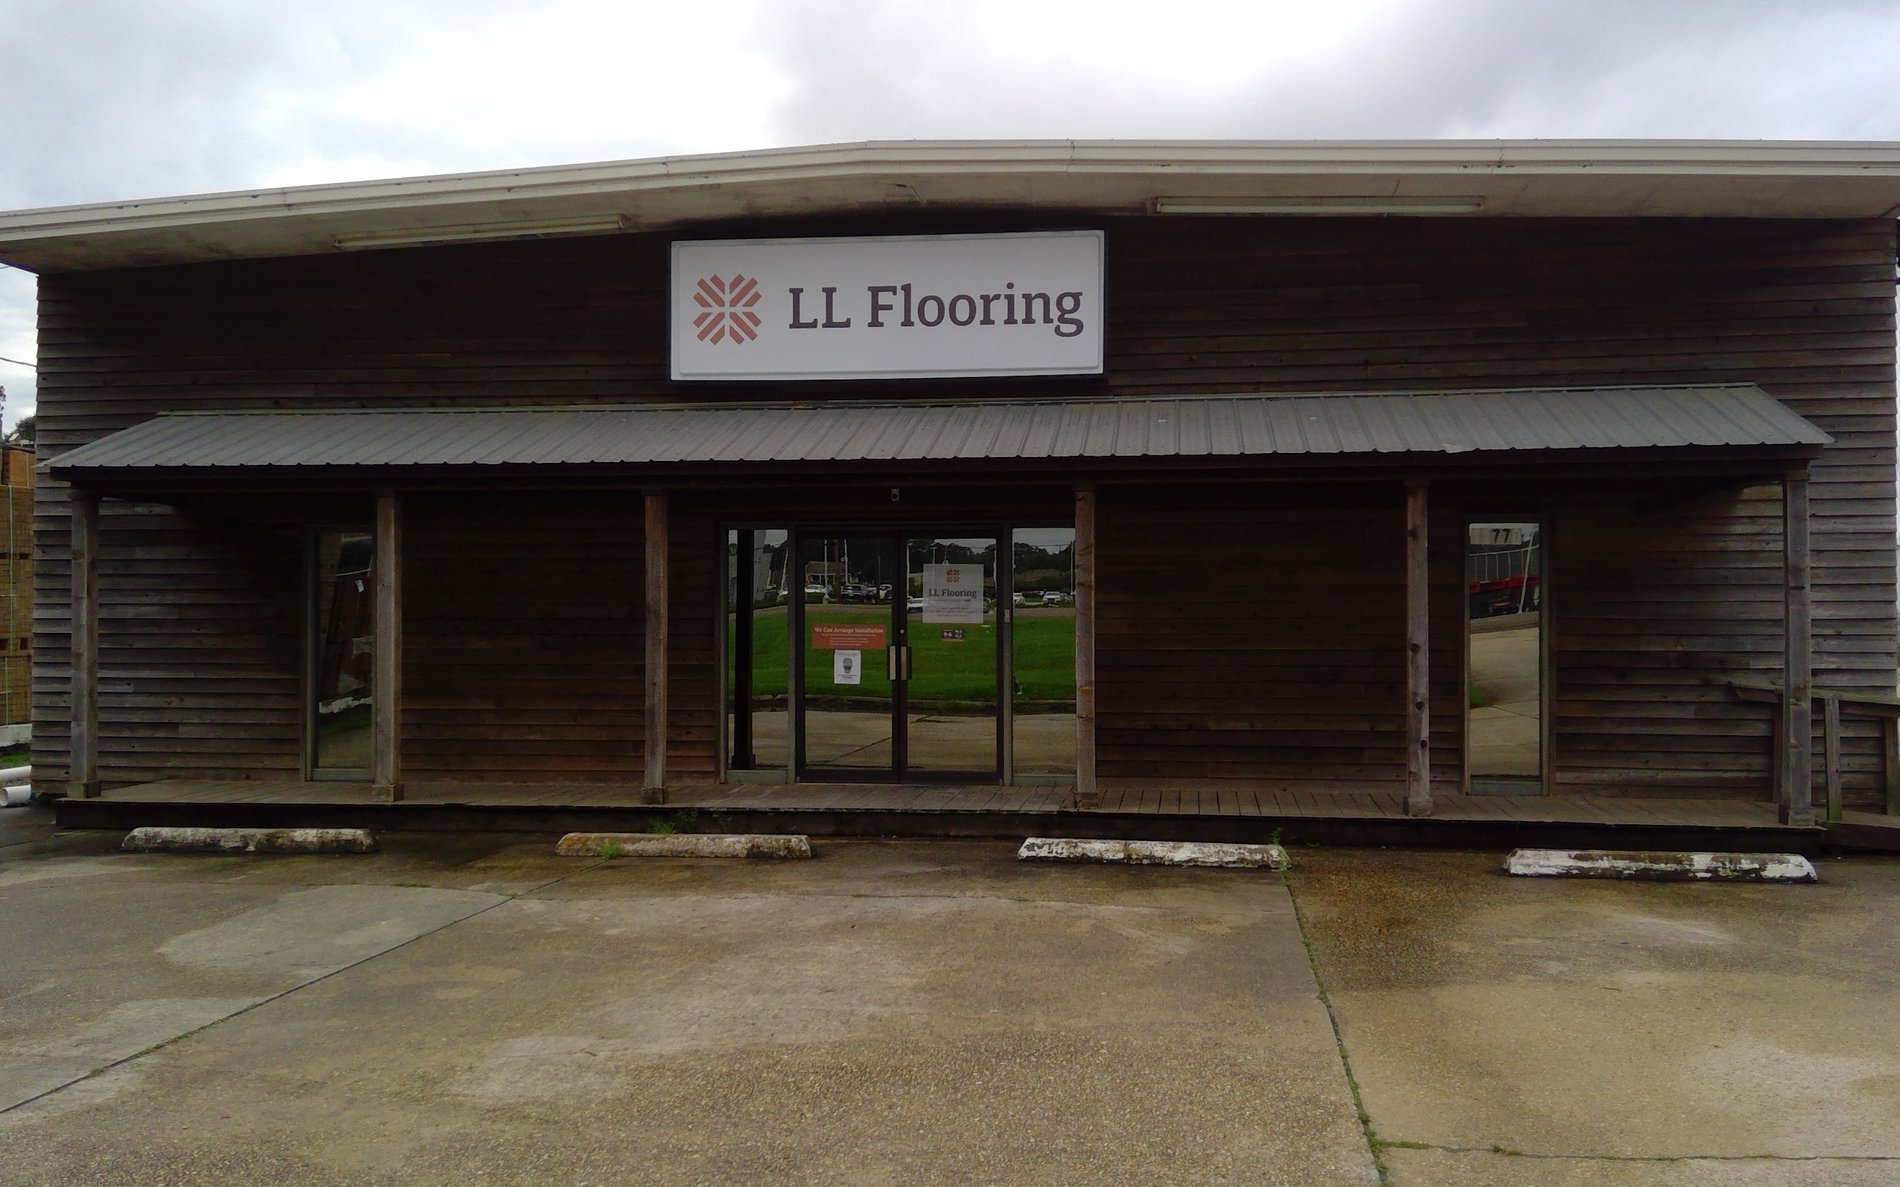 LL Flooring #1073 Baton Rouge | 11770 Airline Highway | Storefront